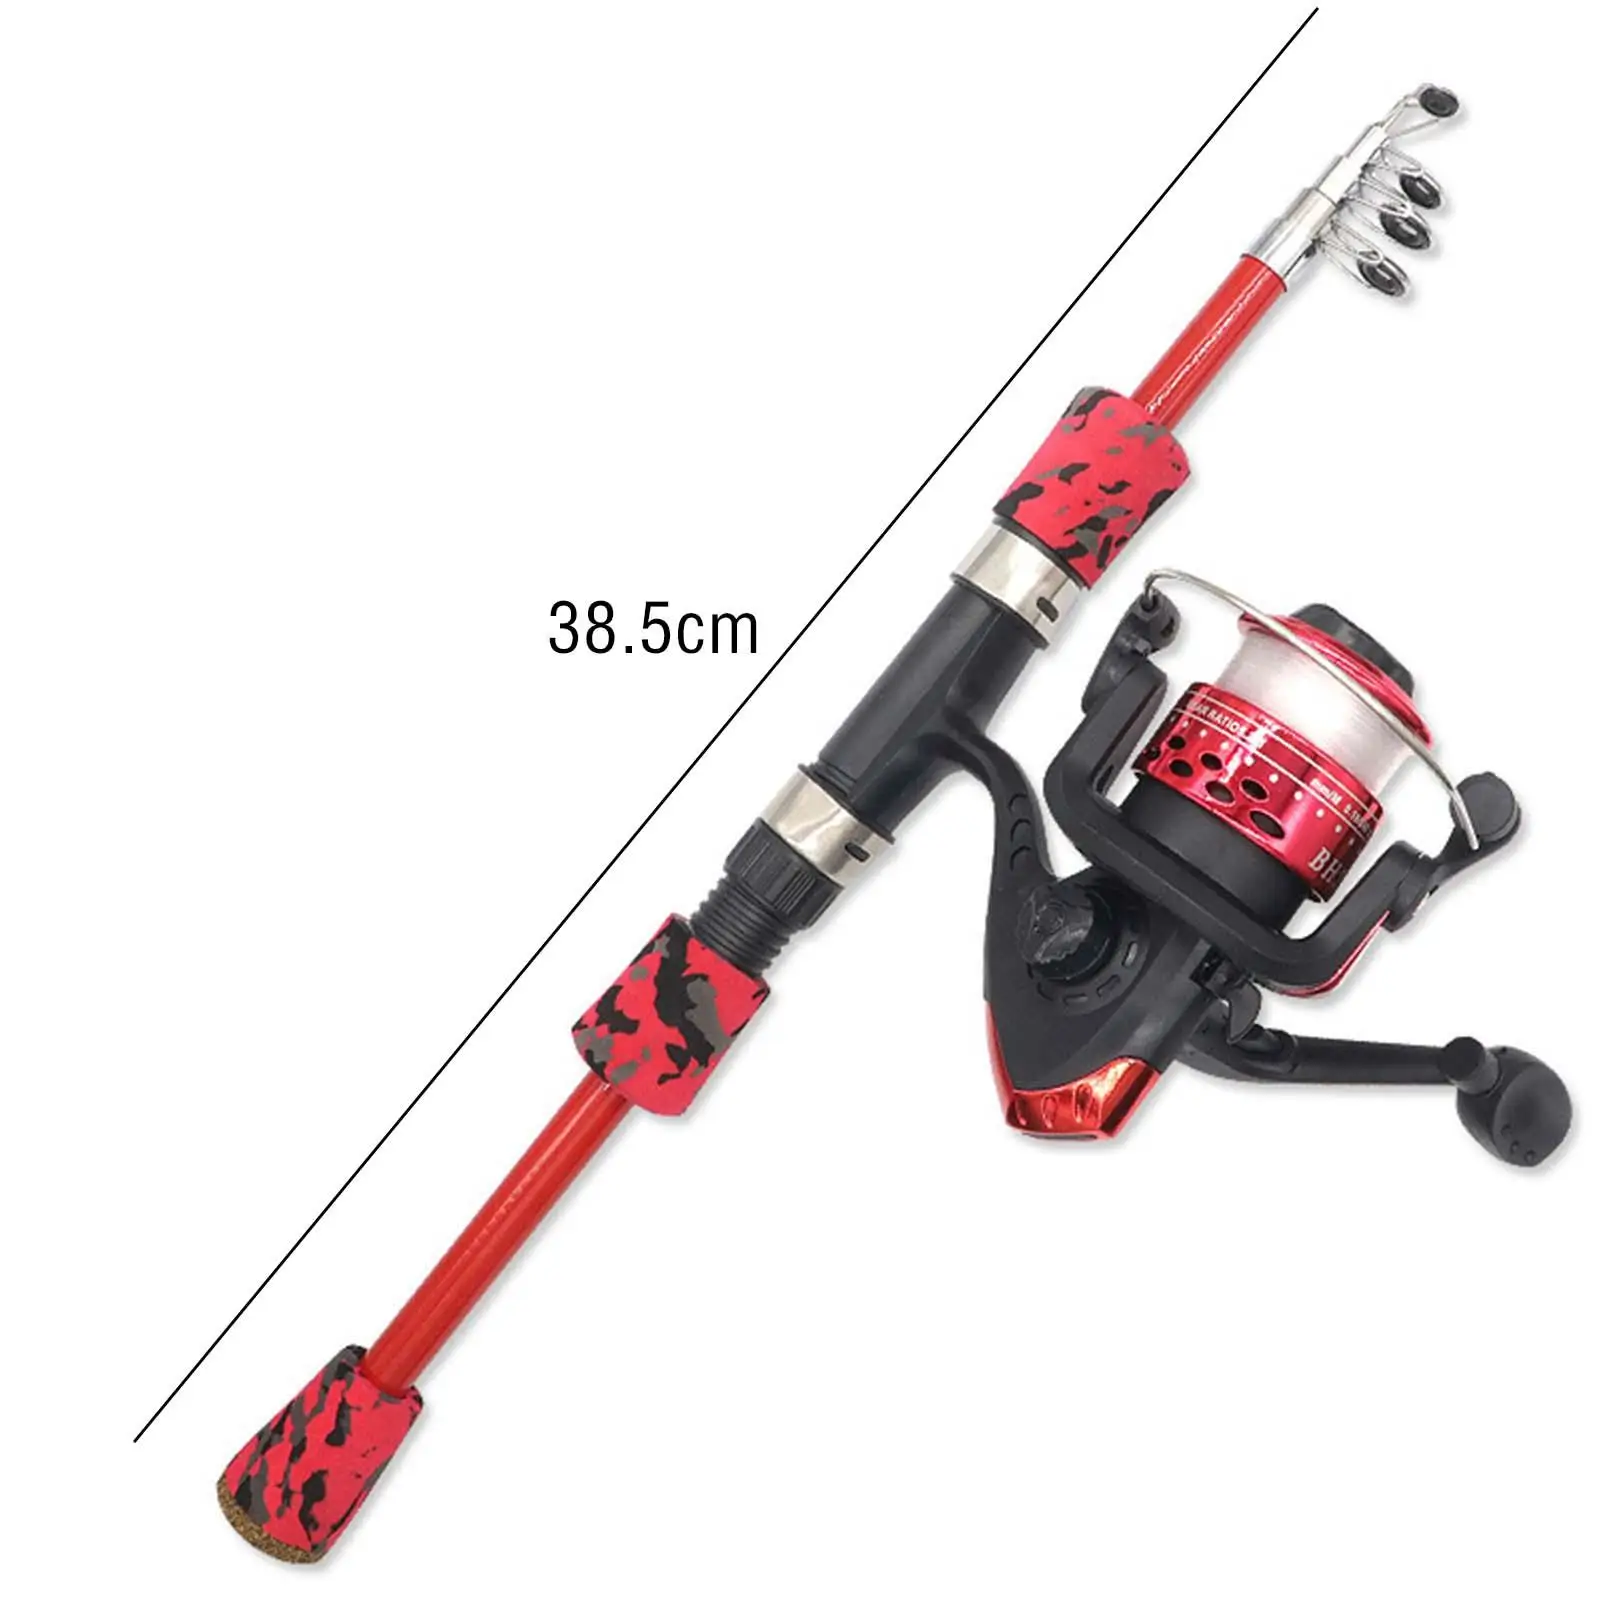 Kids Fishing Rod Set with Travel Bag Outdoor with Fishing Reel Kid Fishing Pole for Starter Children Boys Girls Beginners